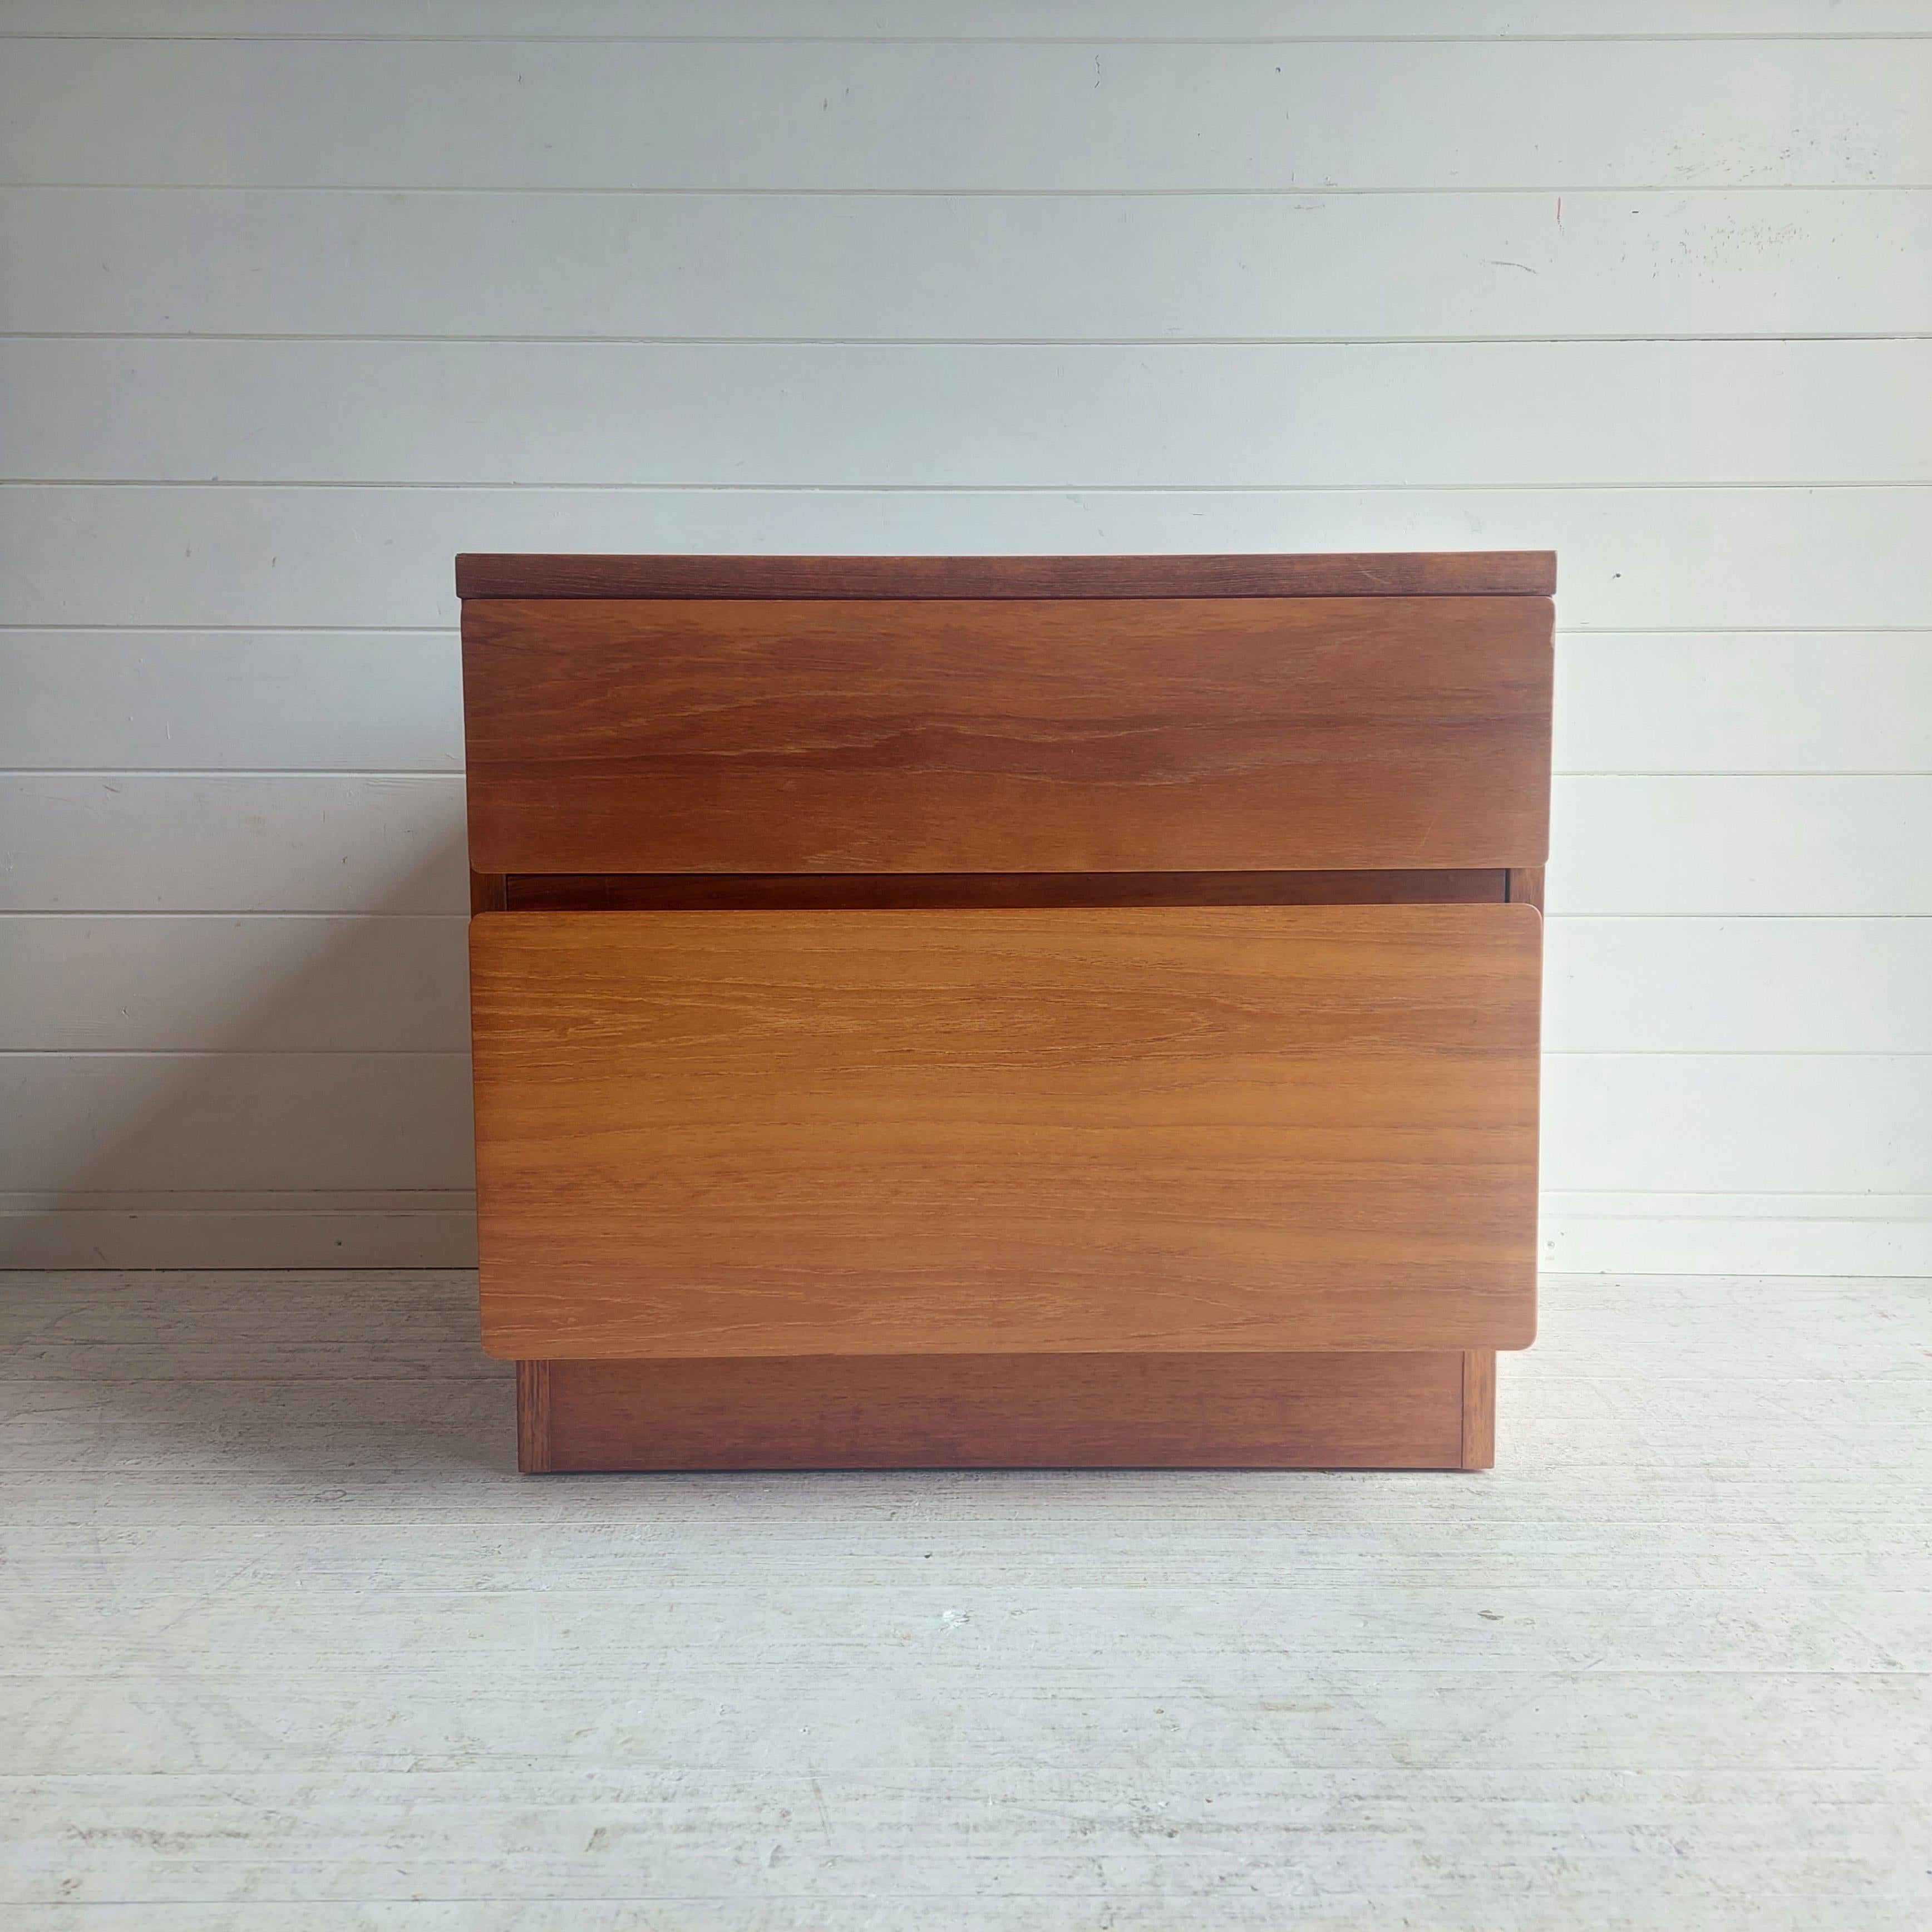 British Mid century teak chest of drawers bedside table by Beaver & Tapley, 1970s